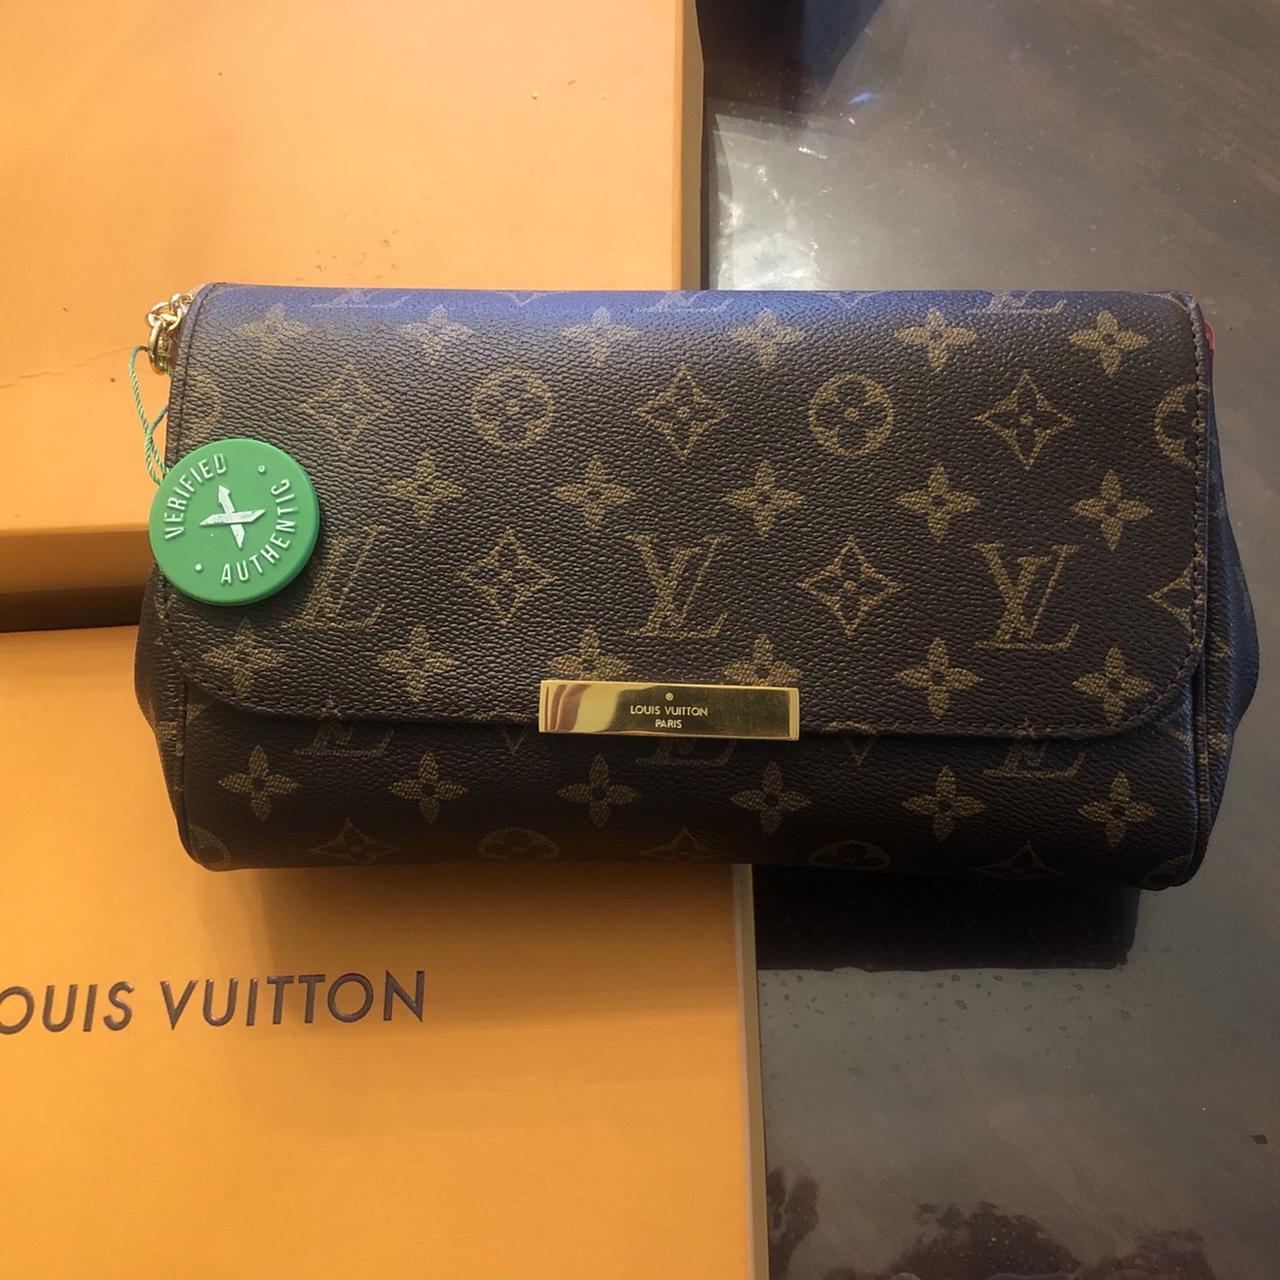 Louis Vuitton bag/purse $400, been used but still in - Depop